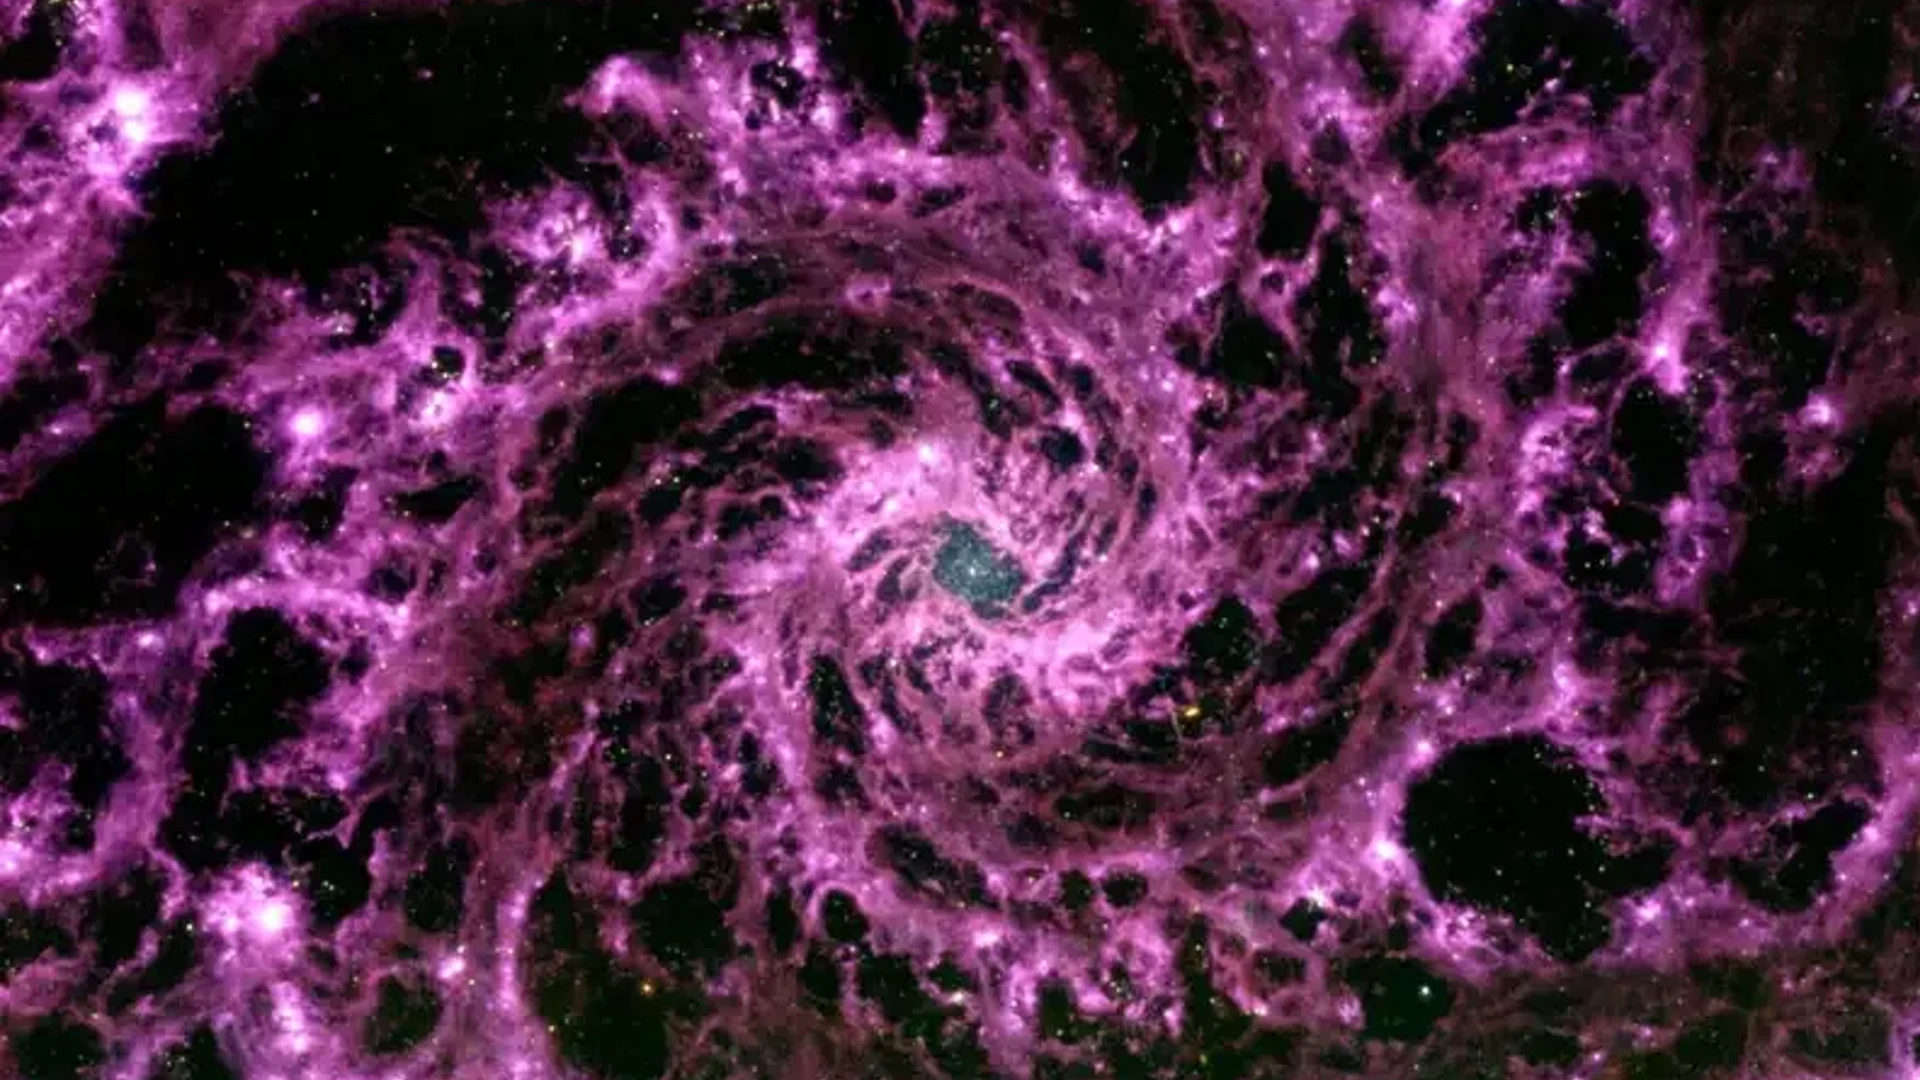 An Amazing JWST Image Depicts A “Purple Cosmic Swirl” Made Of Particles In A Distant Galaxy